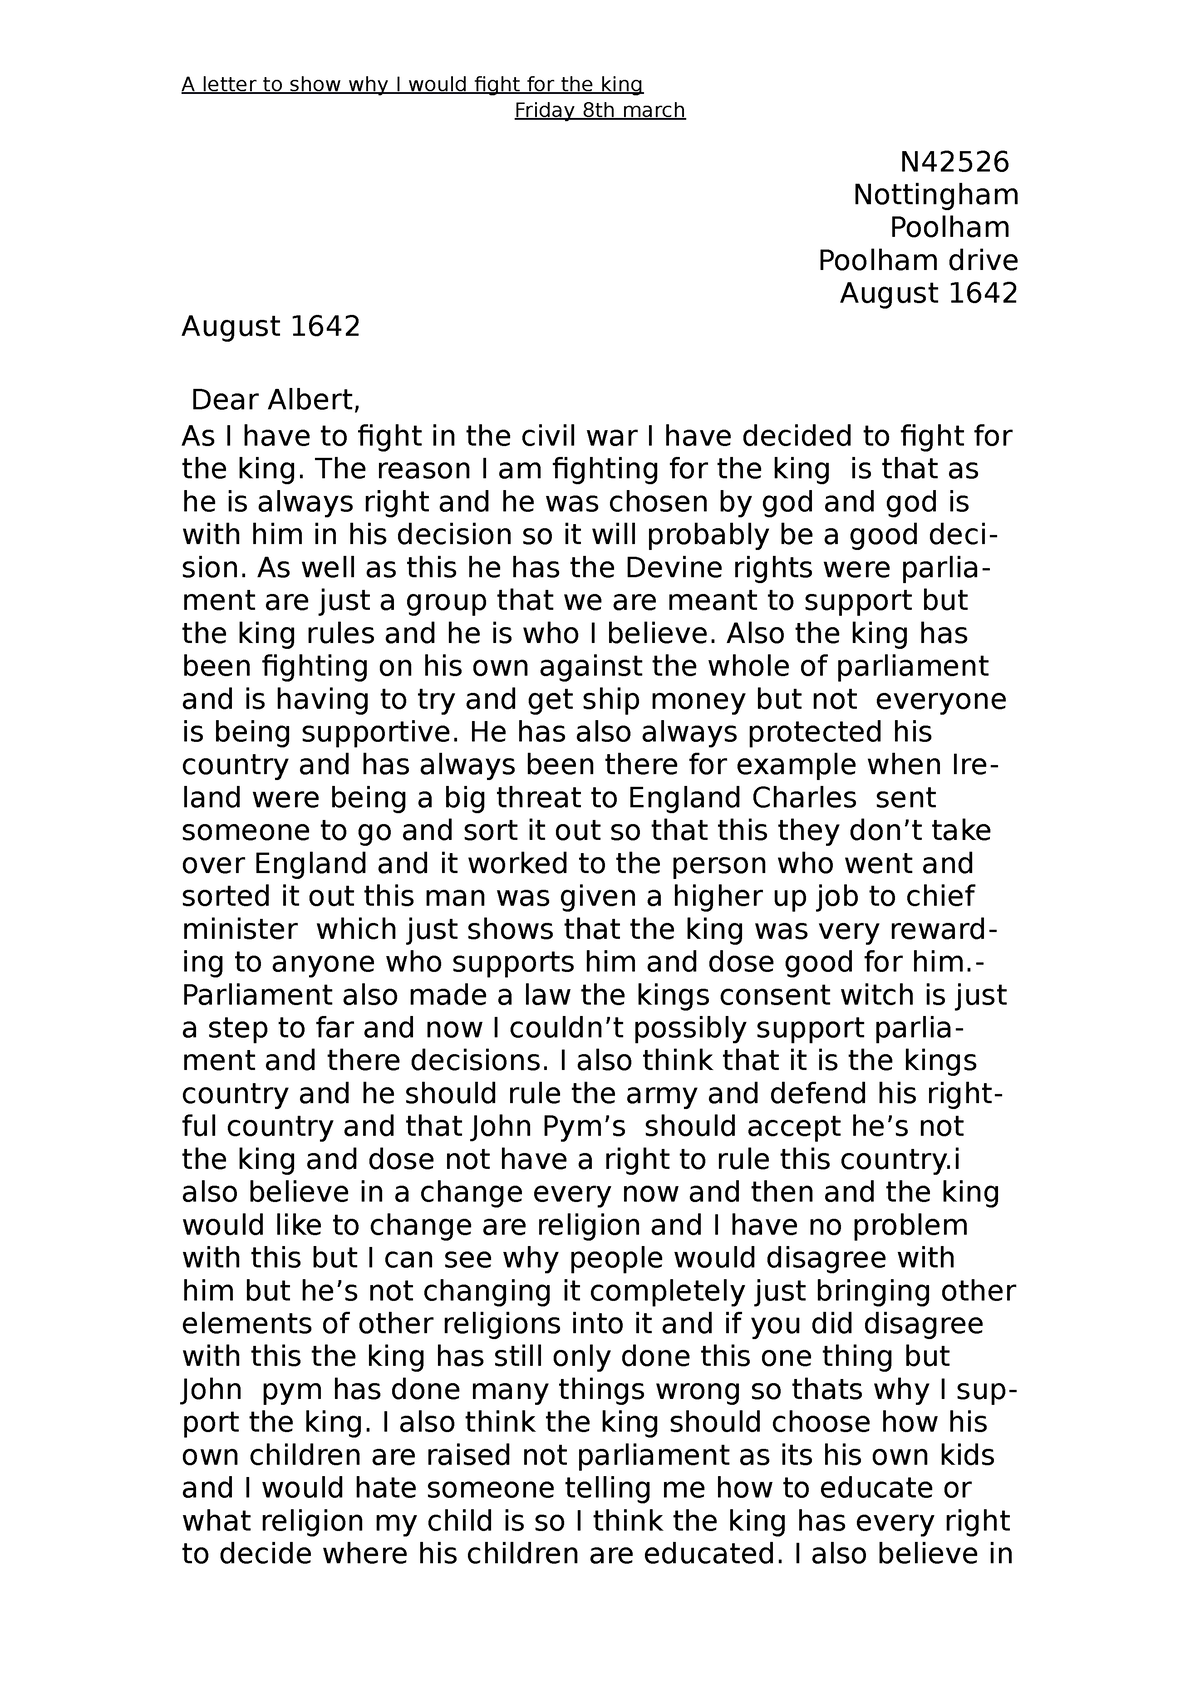 History why i would fight for the king letter - A letter to show why I ...